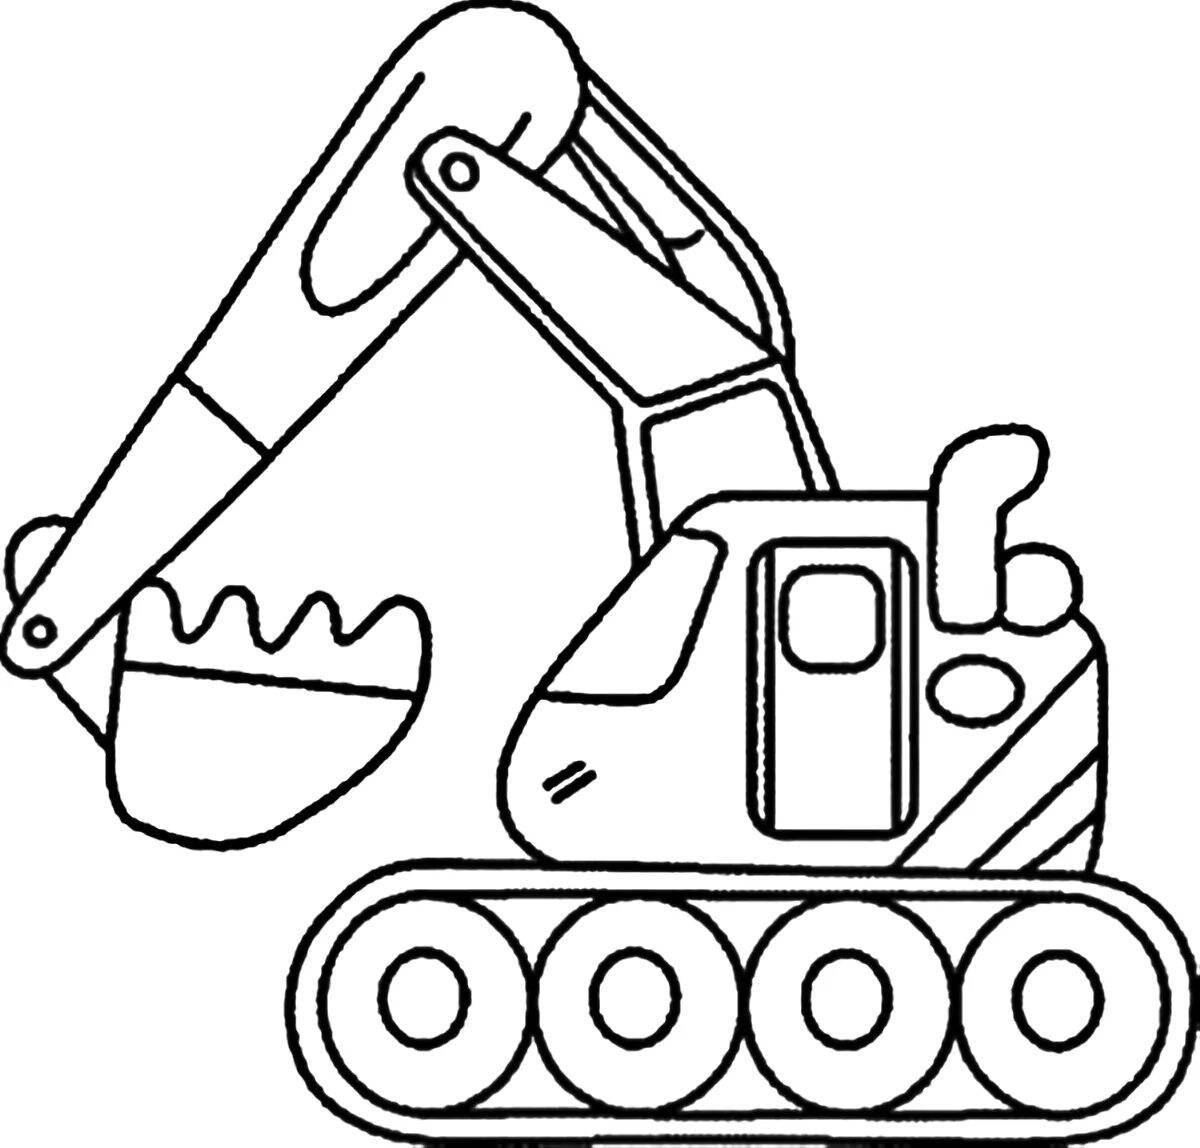 A fascinating coloring book construction equipment for children 6-7 years old